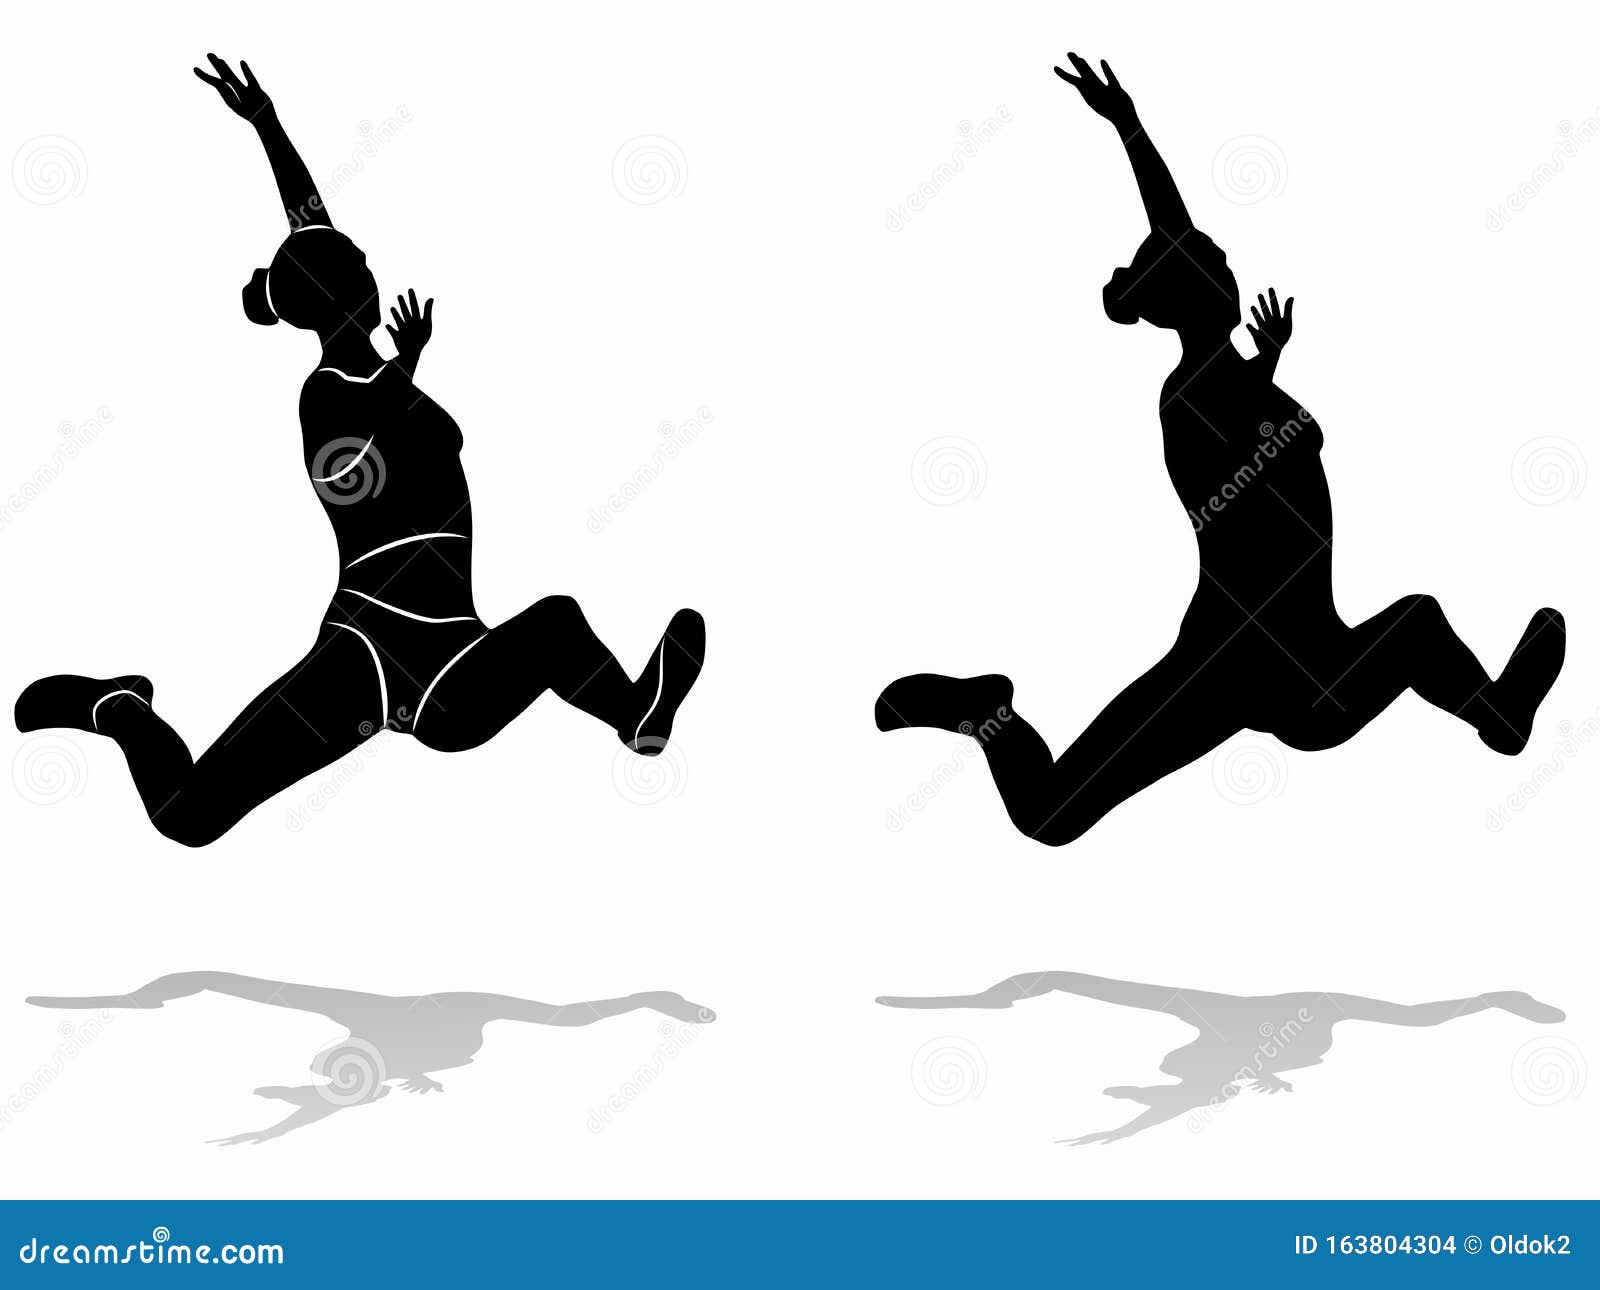  silhouette of a woman jumping,  draw